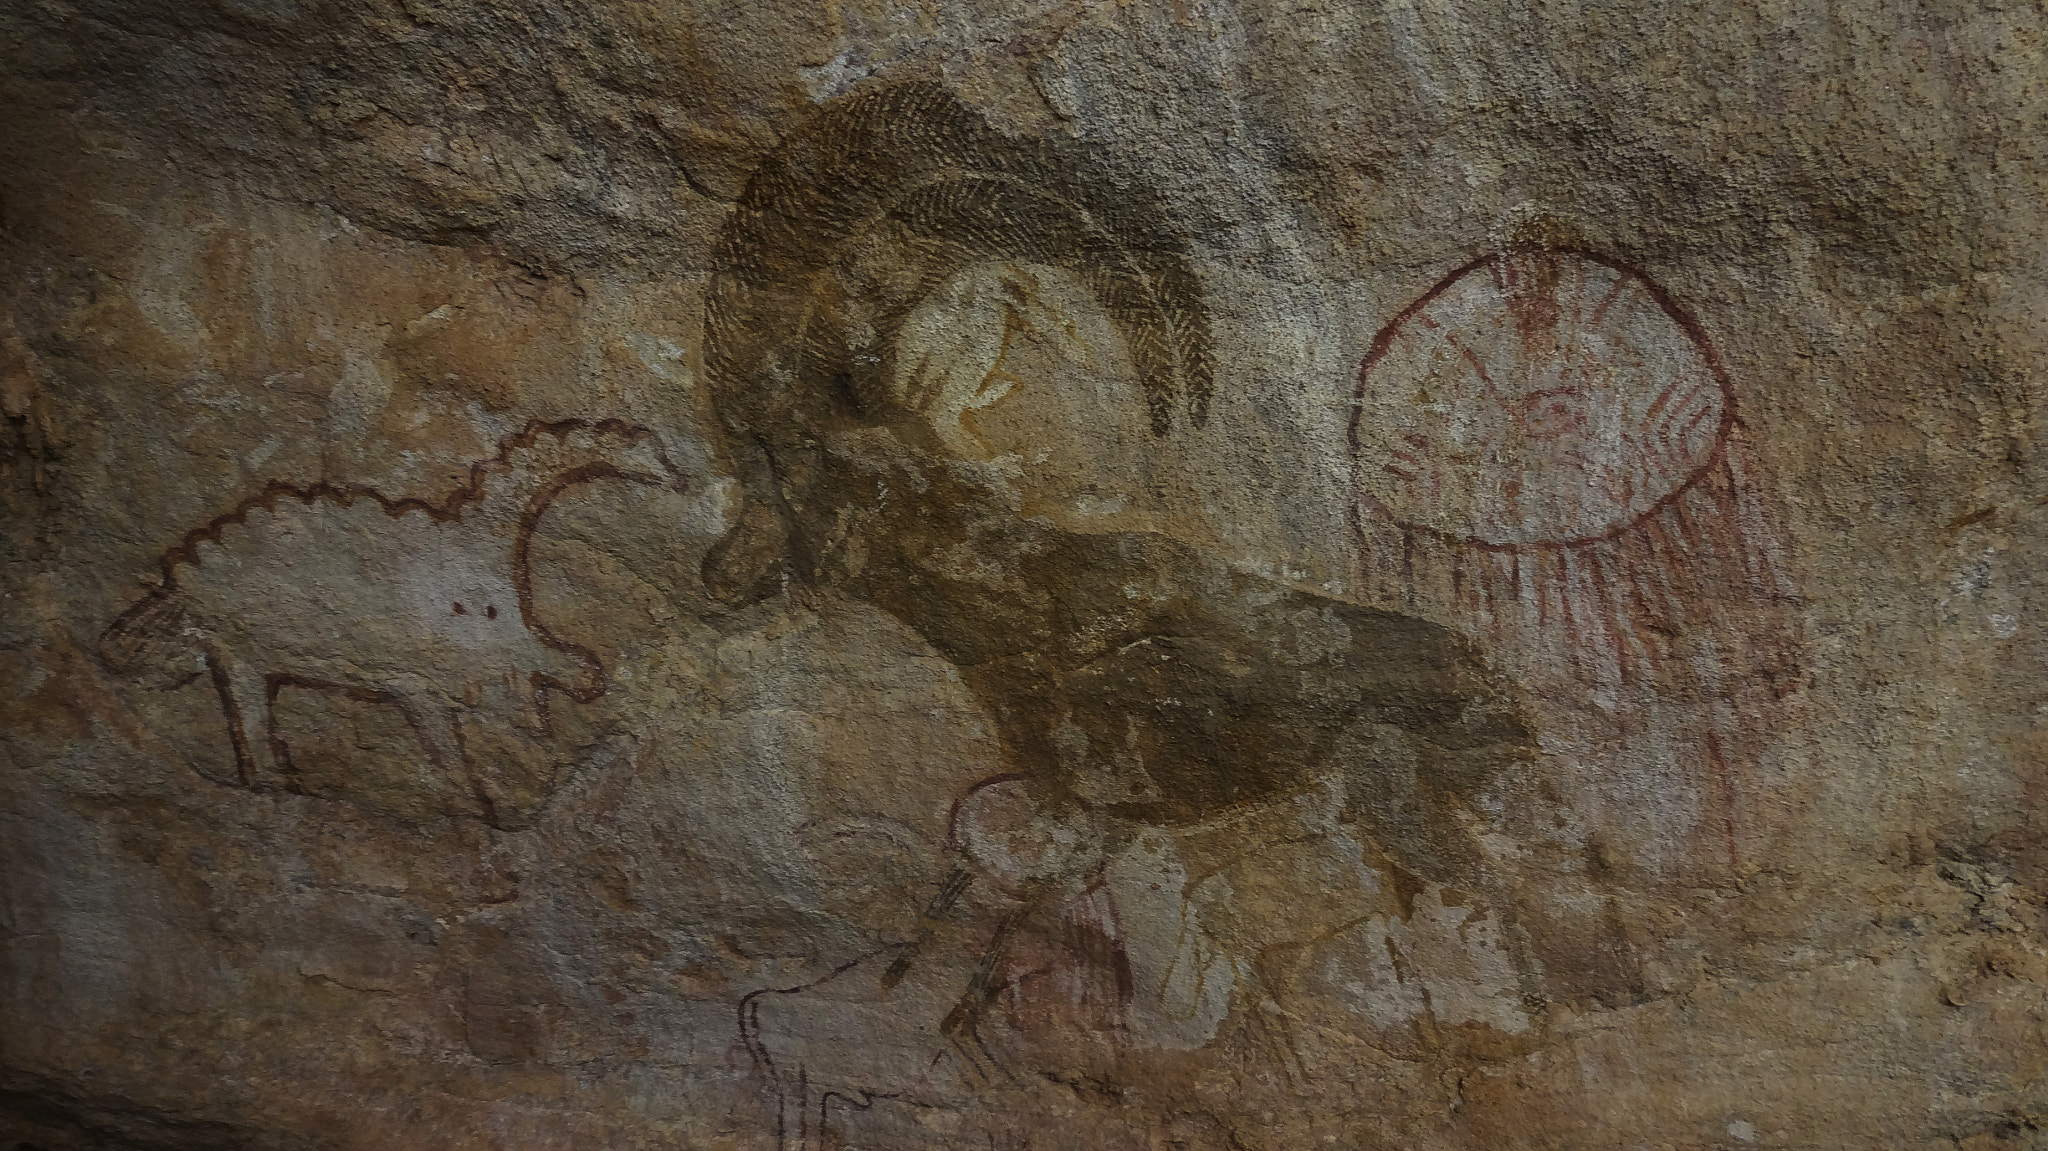 Sony DSC-WX100 sample photo. Mysterious creatures in a prehistoric rockart photography